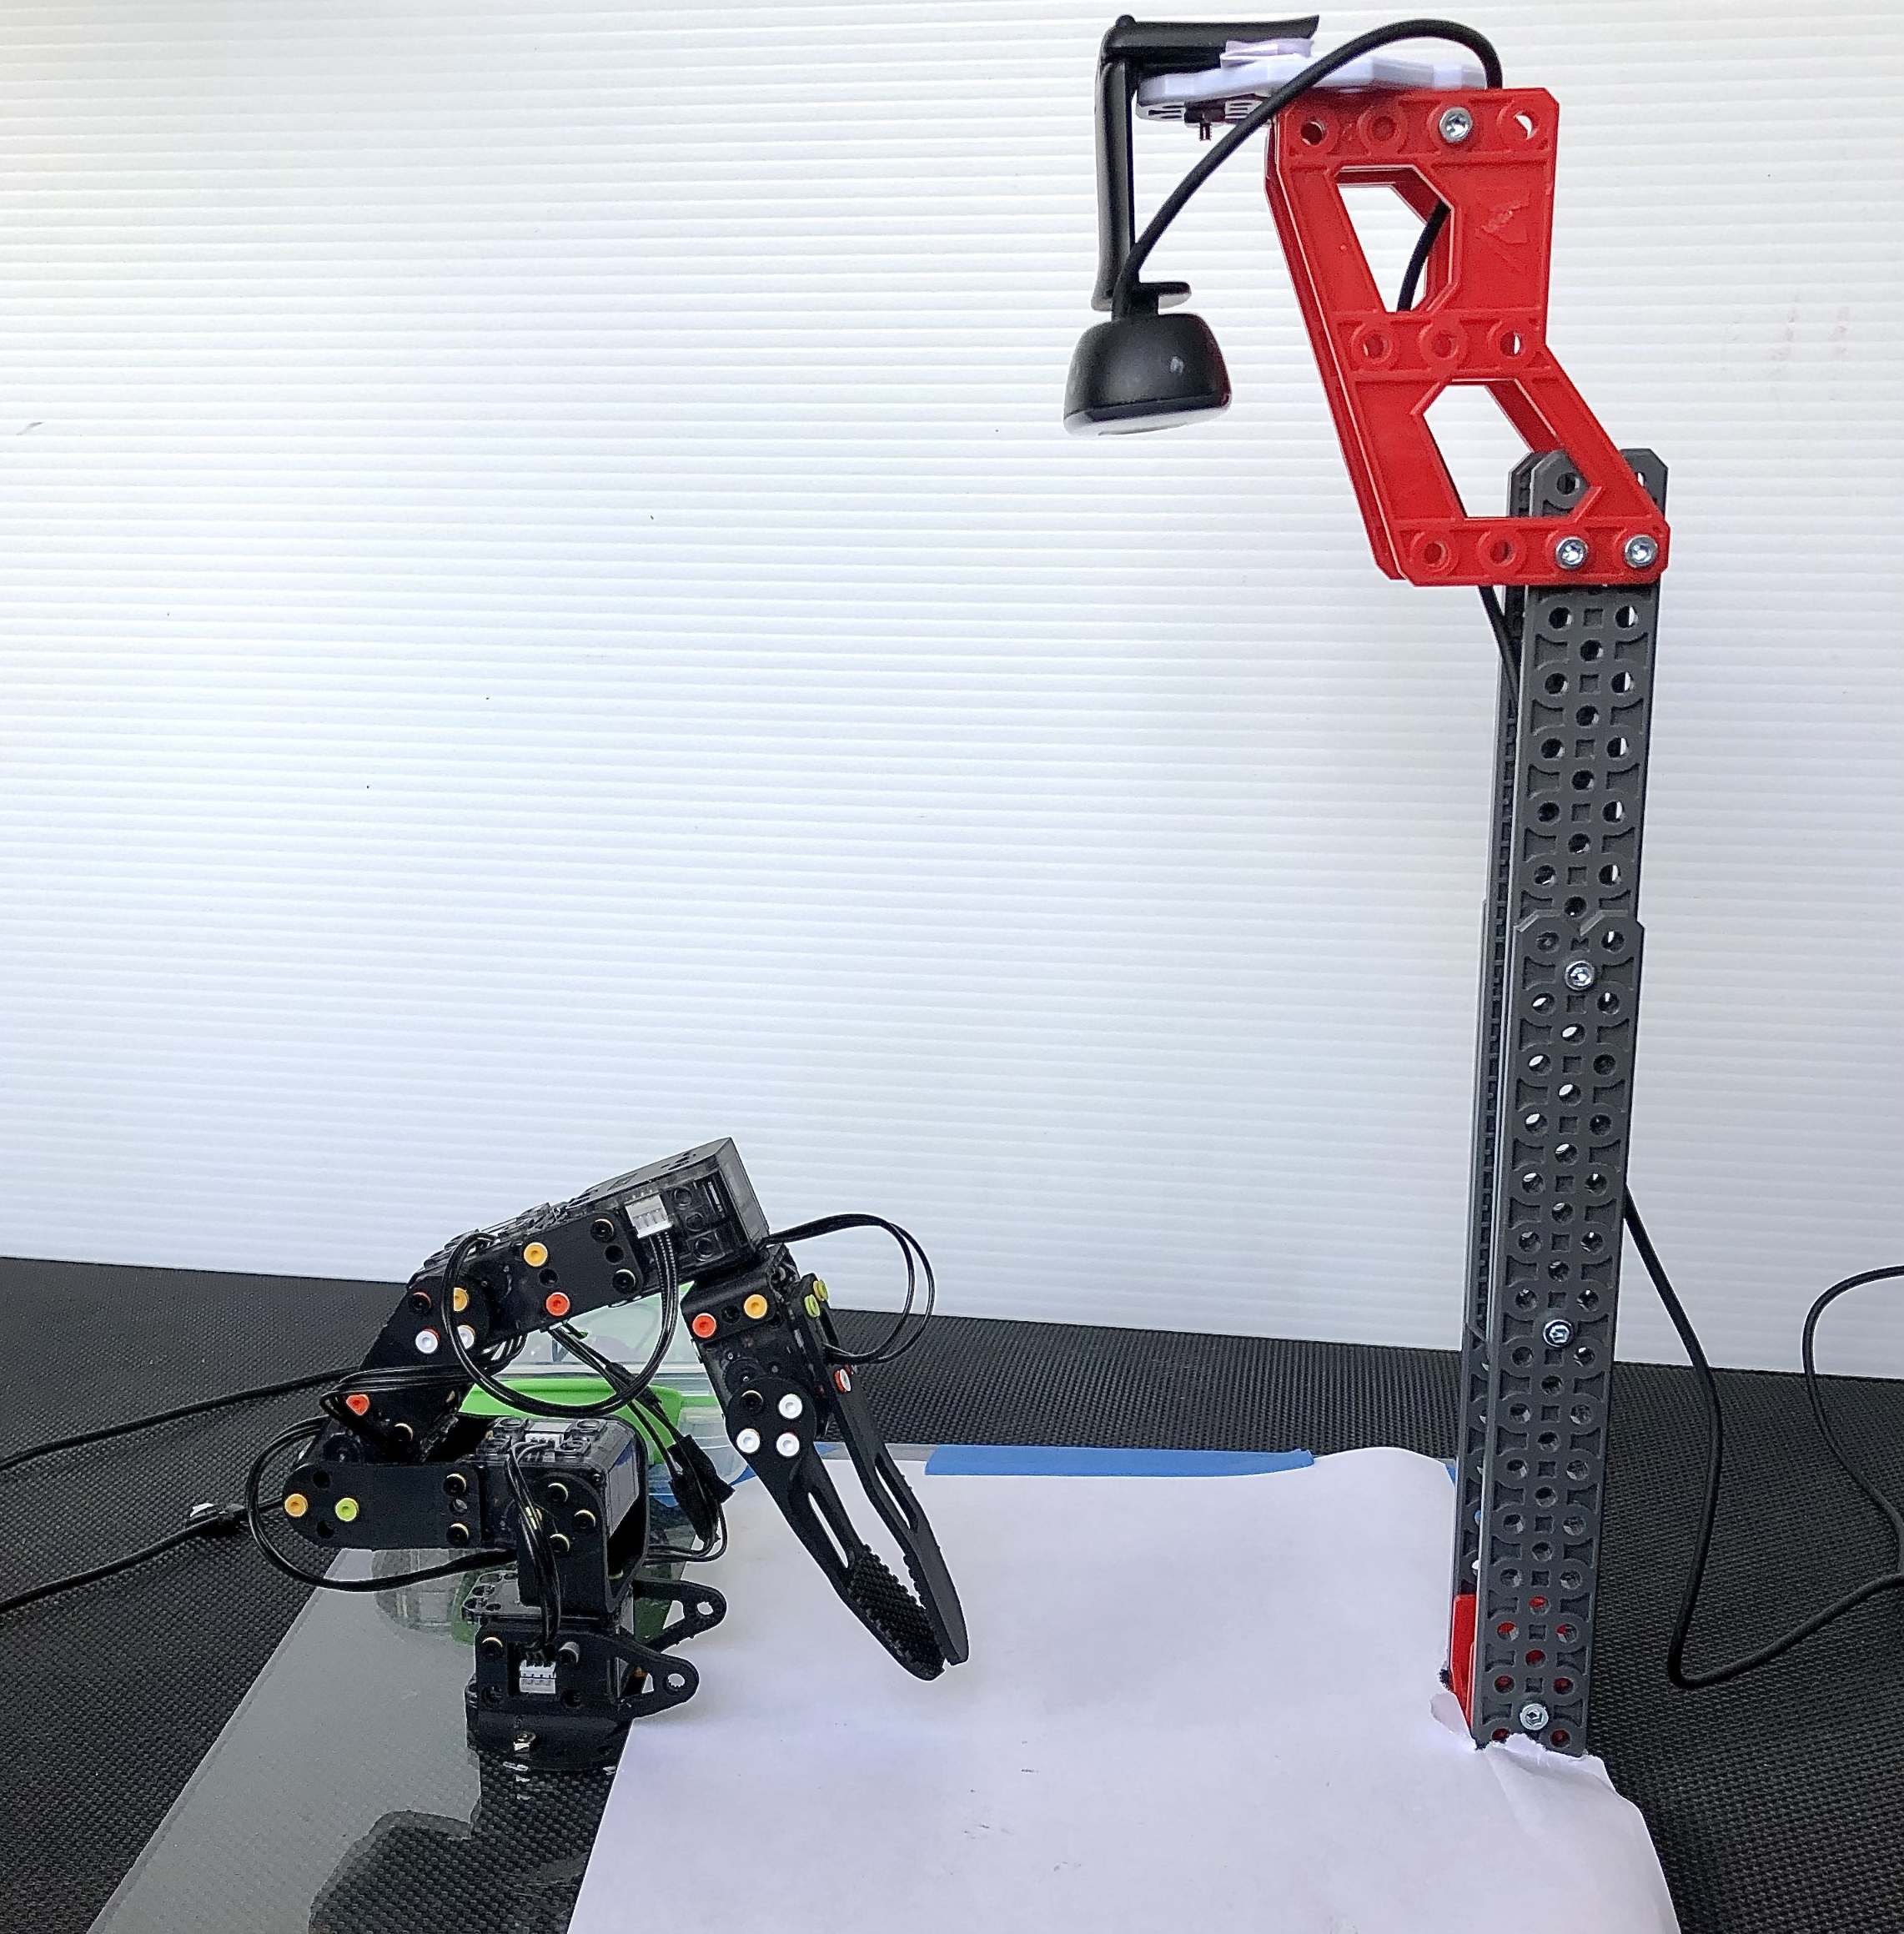 The robotic arm sits on a platform with a camera facing down at the platform